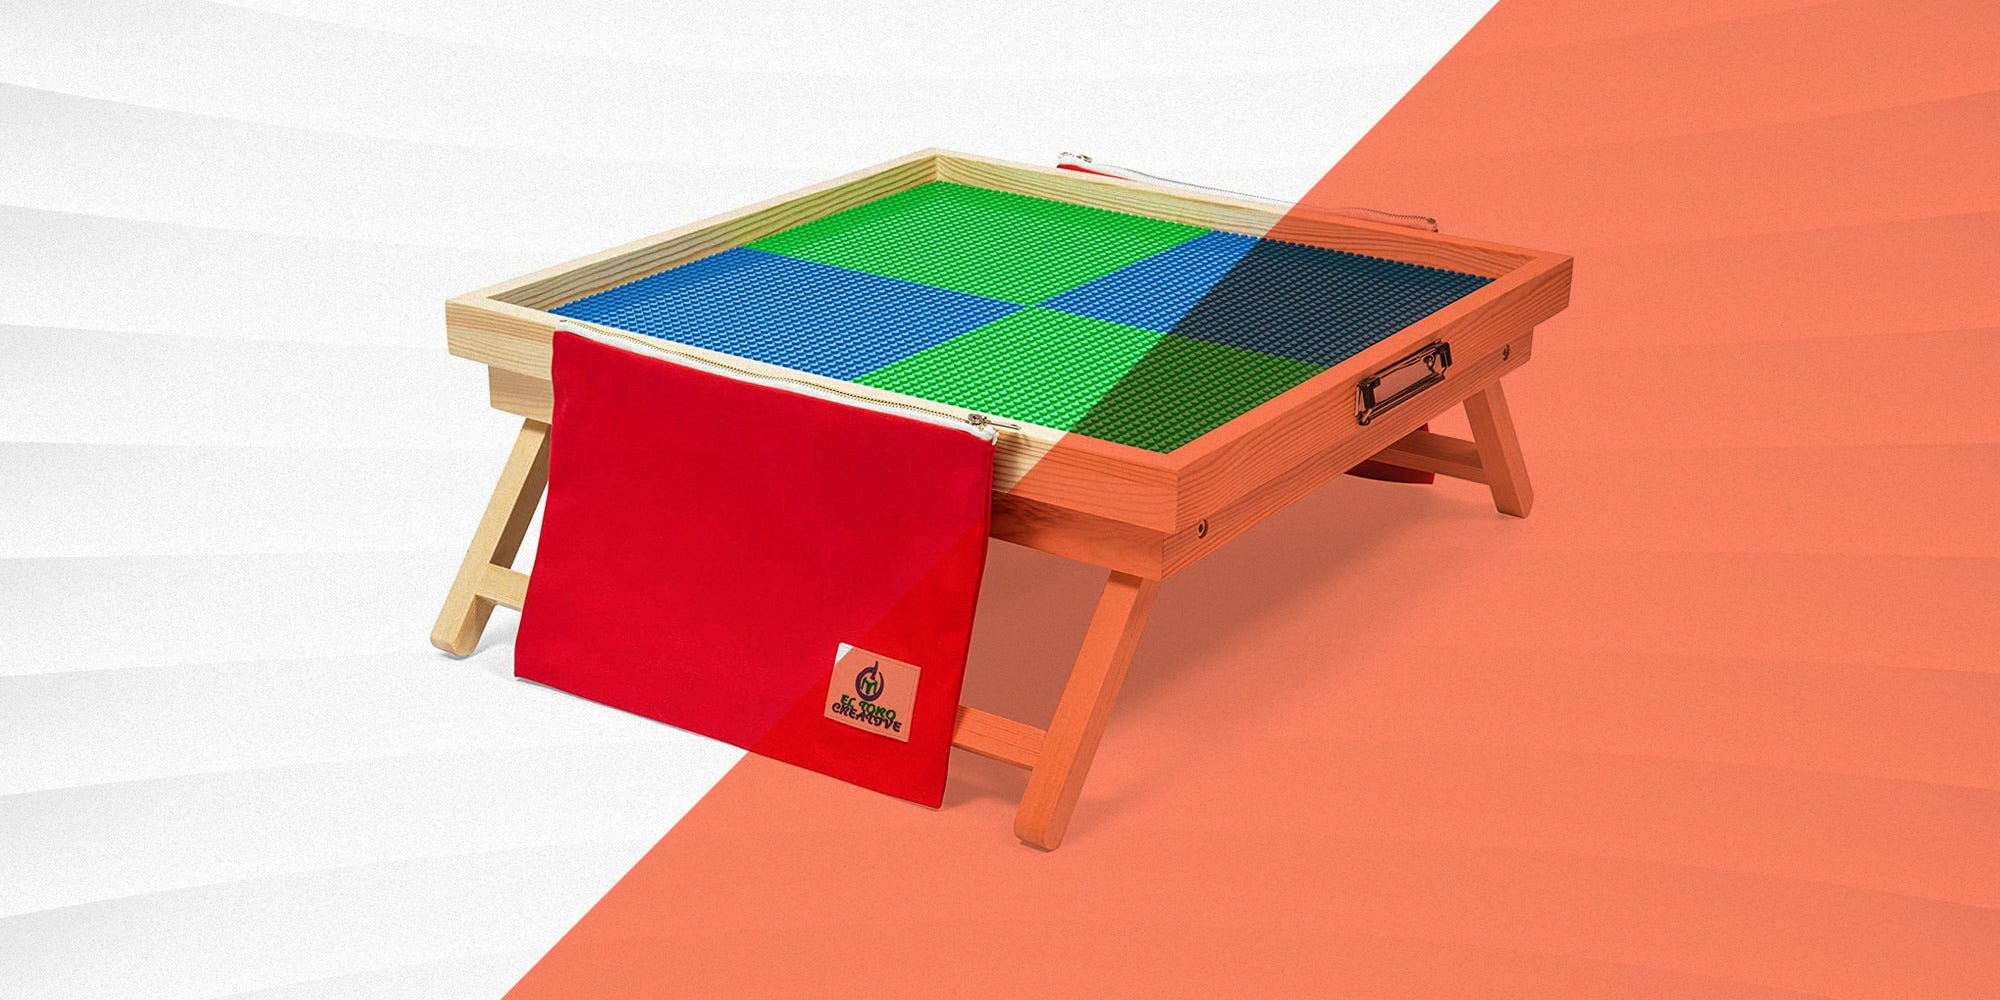 The 8 Best Lego Tables for Storage and Play